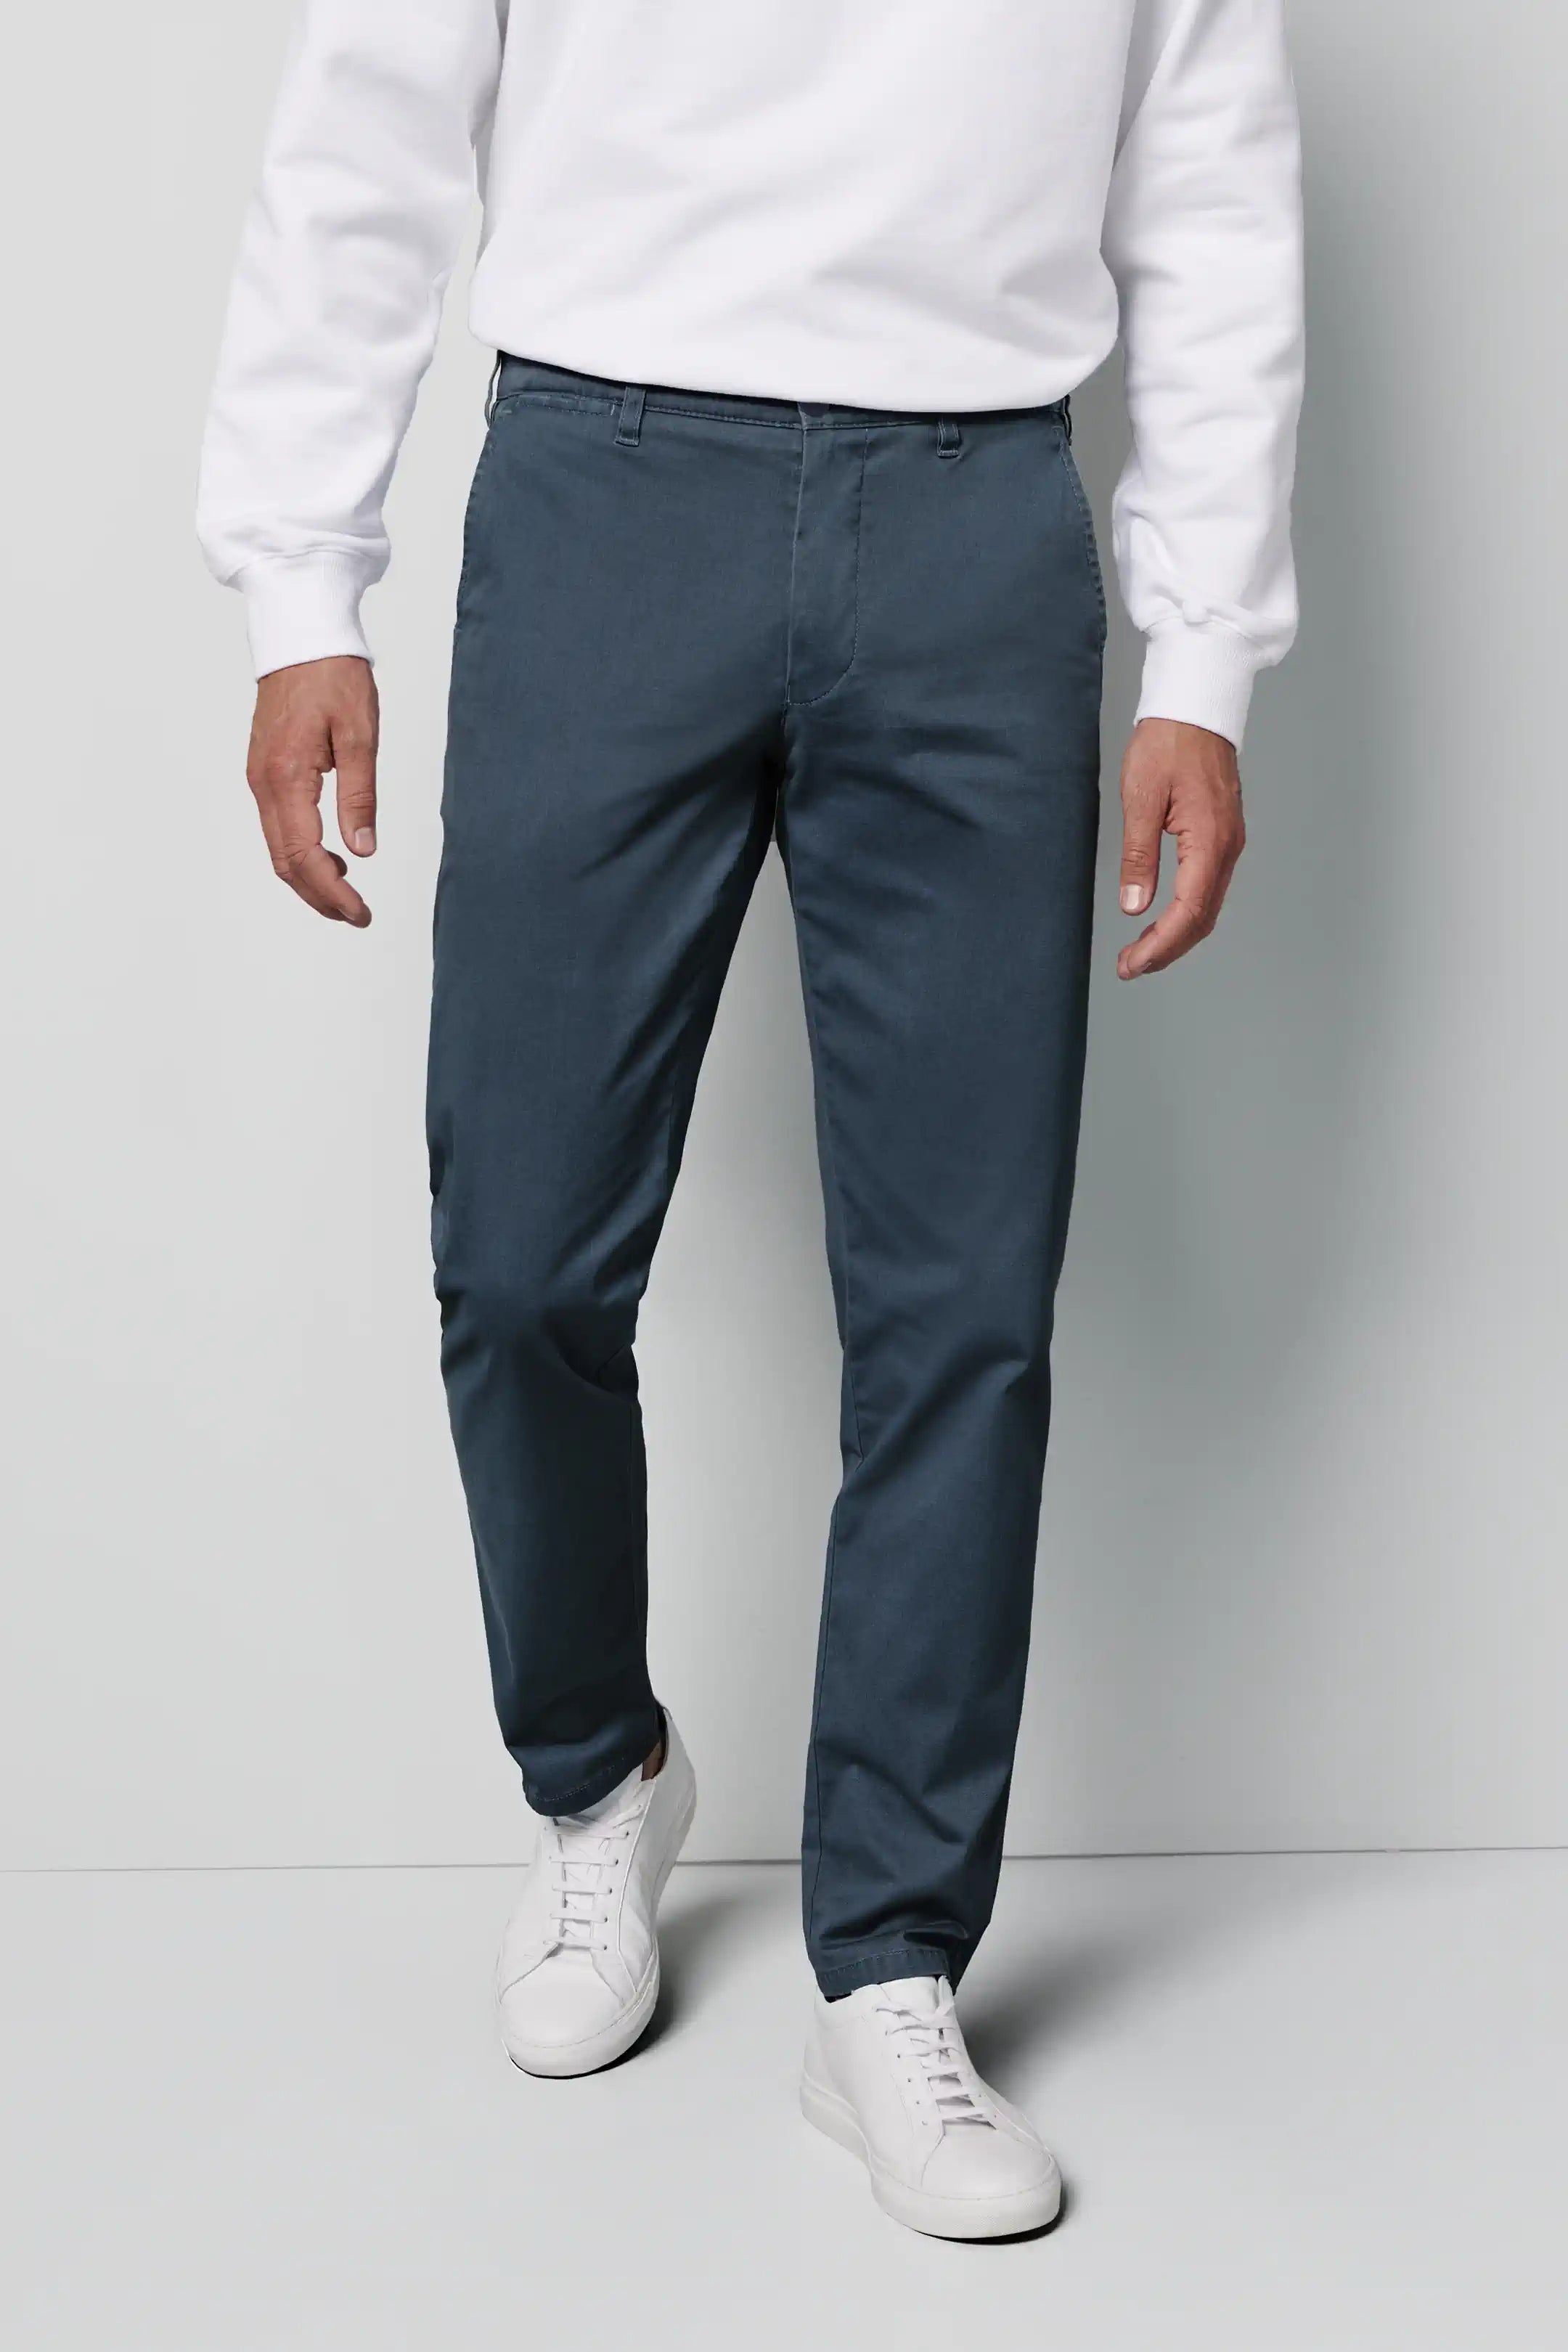 MEYER M5 Trousers - 6001 Soft Stretch Cotton Chinos - Blue